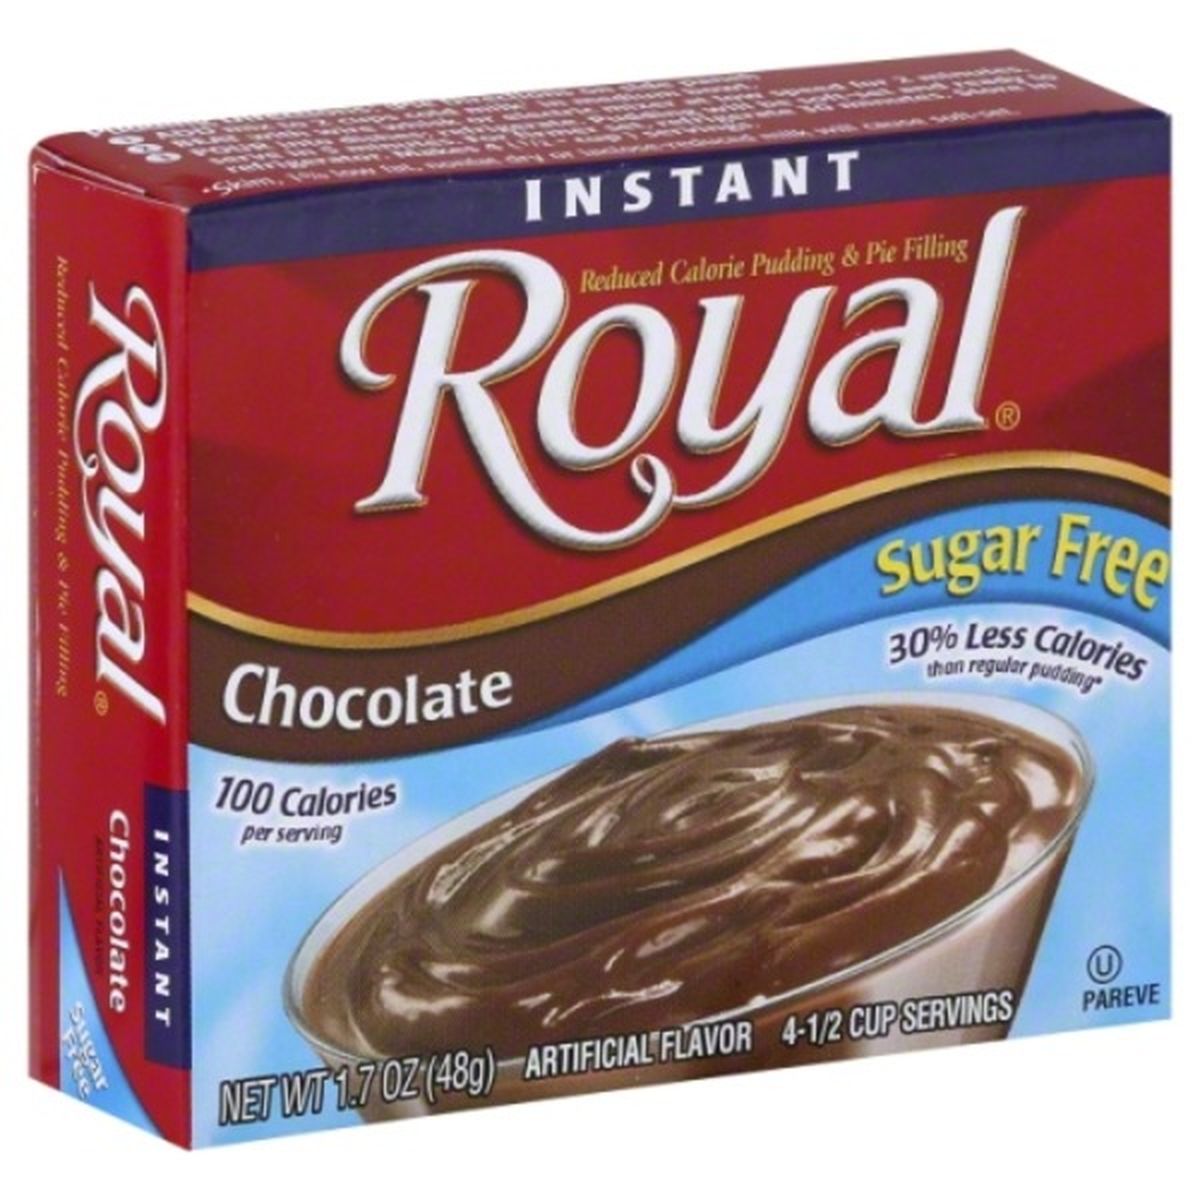 Calories in Royal Pudding & Pie Filling, Instant, Reduced Calorie, Sugar Free, Chocolate